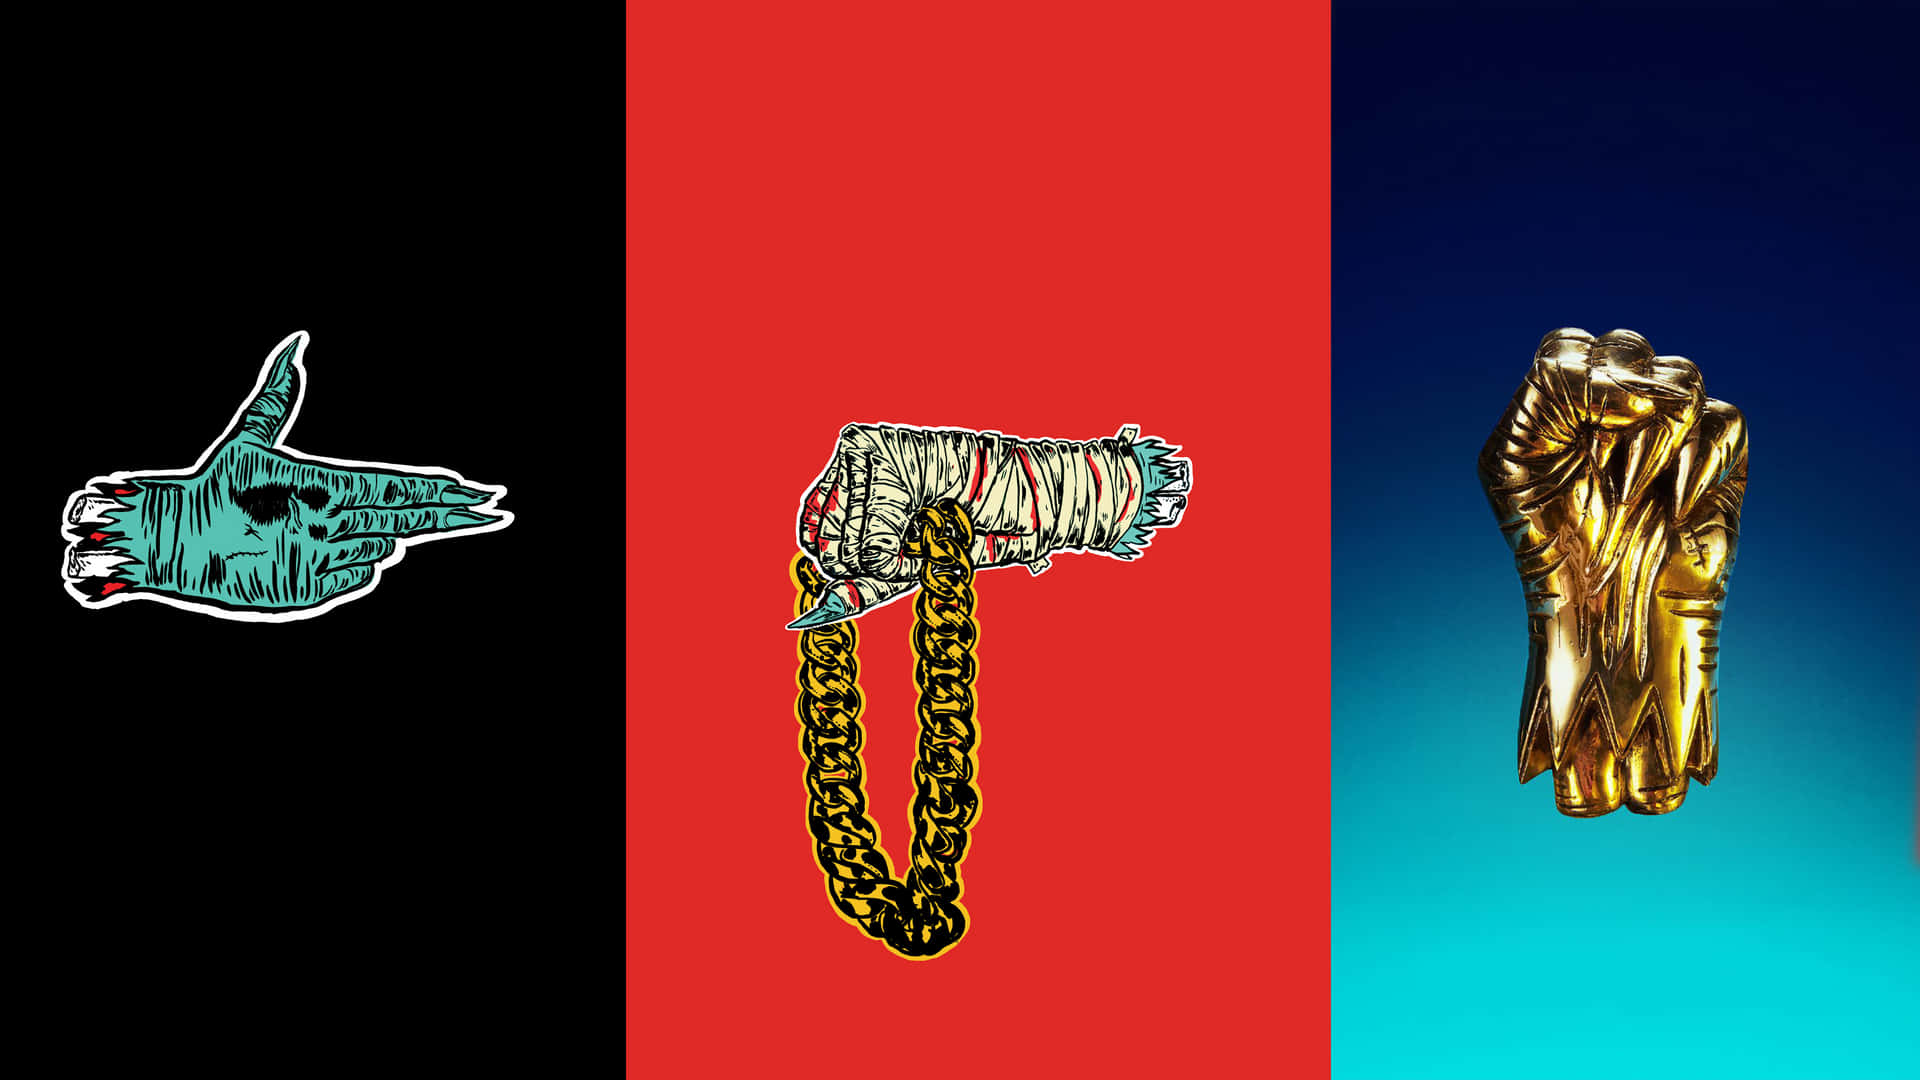 A Group Of Different Shaped Objects With Chains On Them Wallpaper